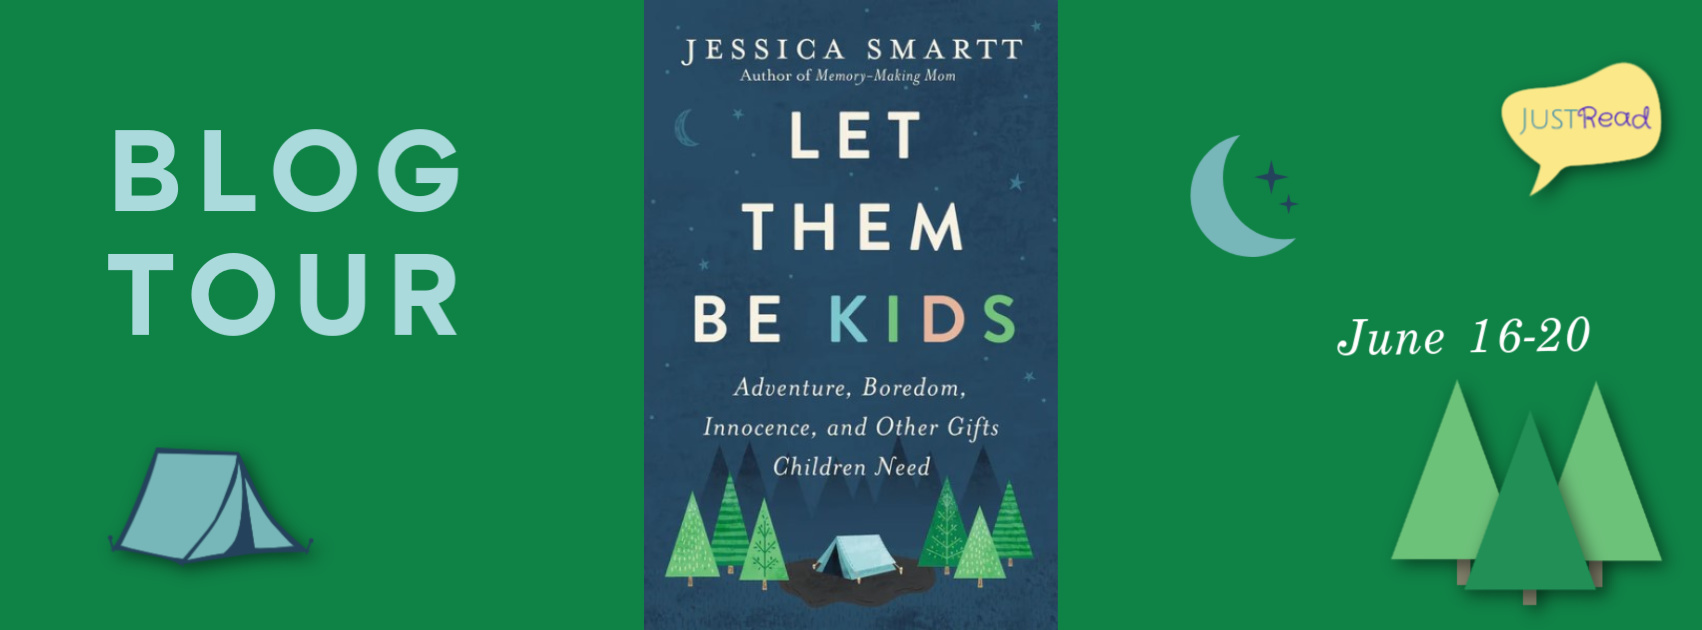 Let Them Be Kids Book study